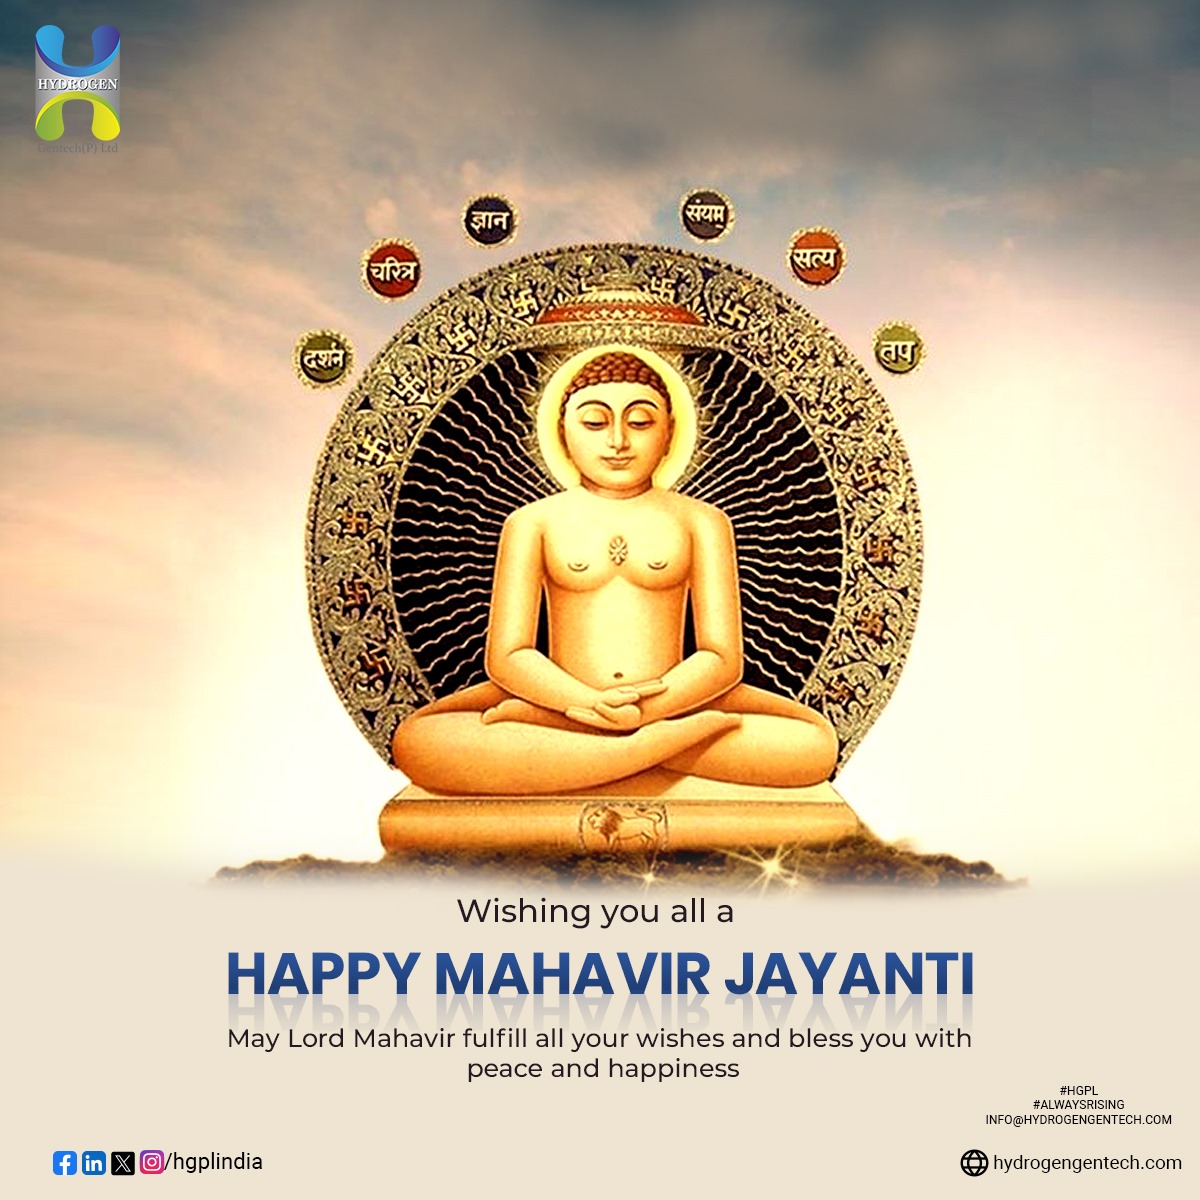 🙏✨ On the auspicious occasion of Mahavir Jayanti, let's honor the teachings of Lord Mahavir – compassion, non-violence, and equality. At #HGPL, we embrace these timeless values as we strive for a world of harmony and sustainability.